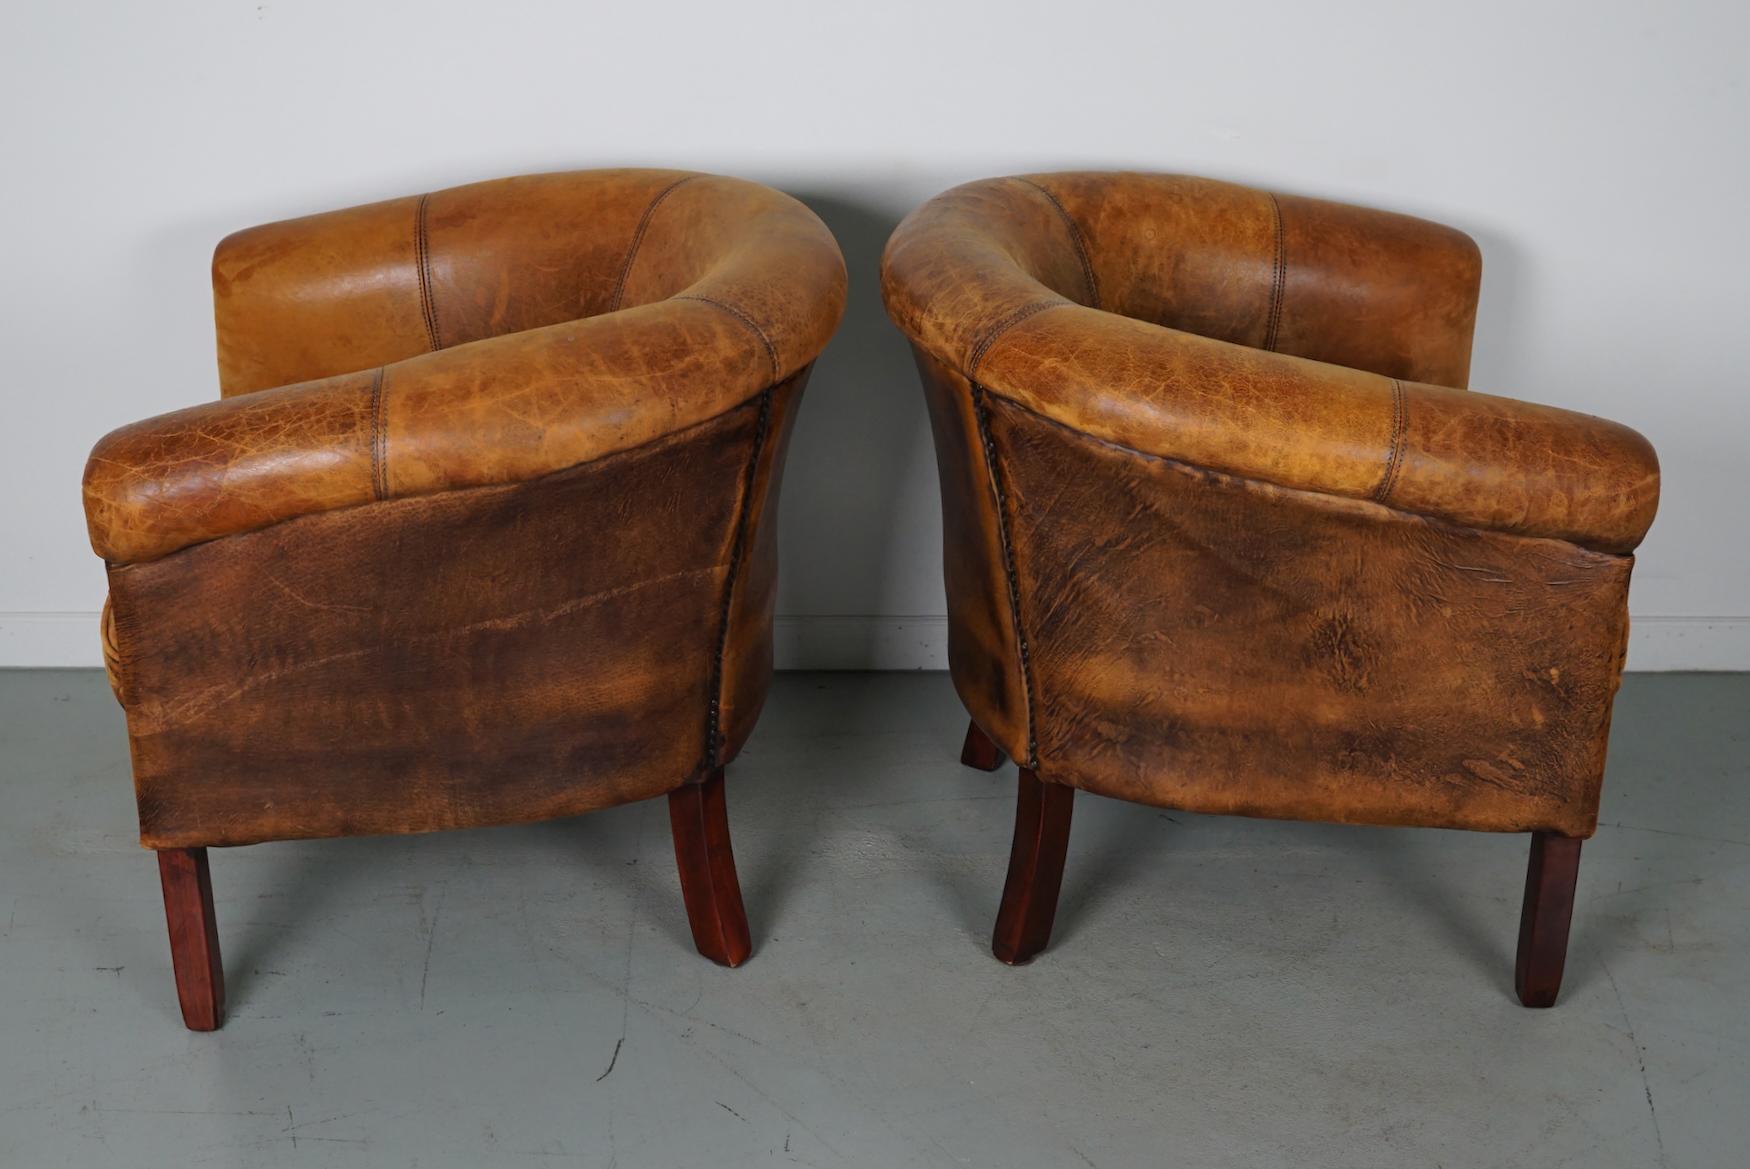 Vintage Dutch Cognac Colored Leather Club Chair, Set of 2 with Footstools For Sale 6